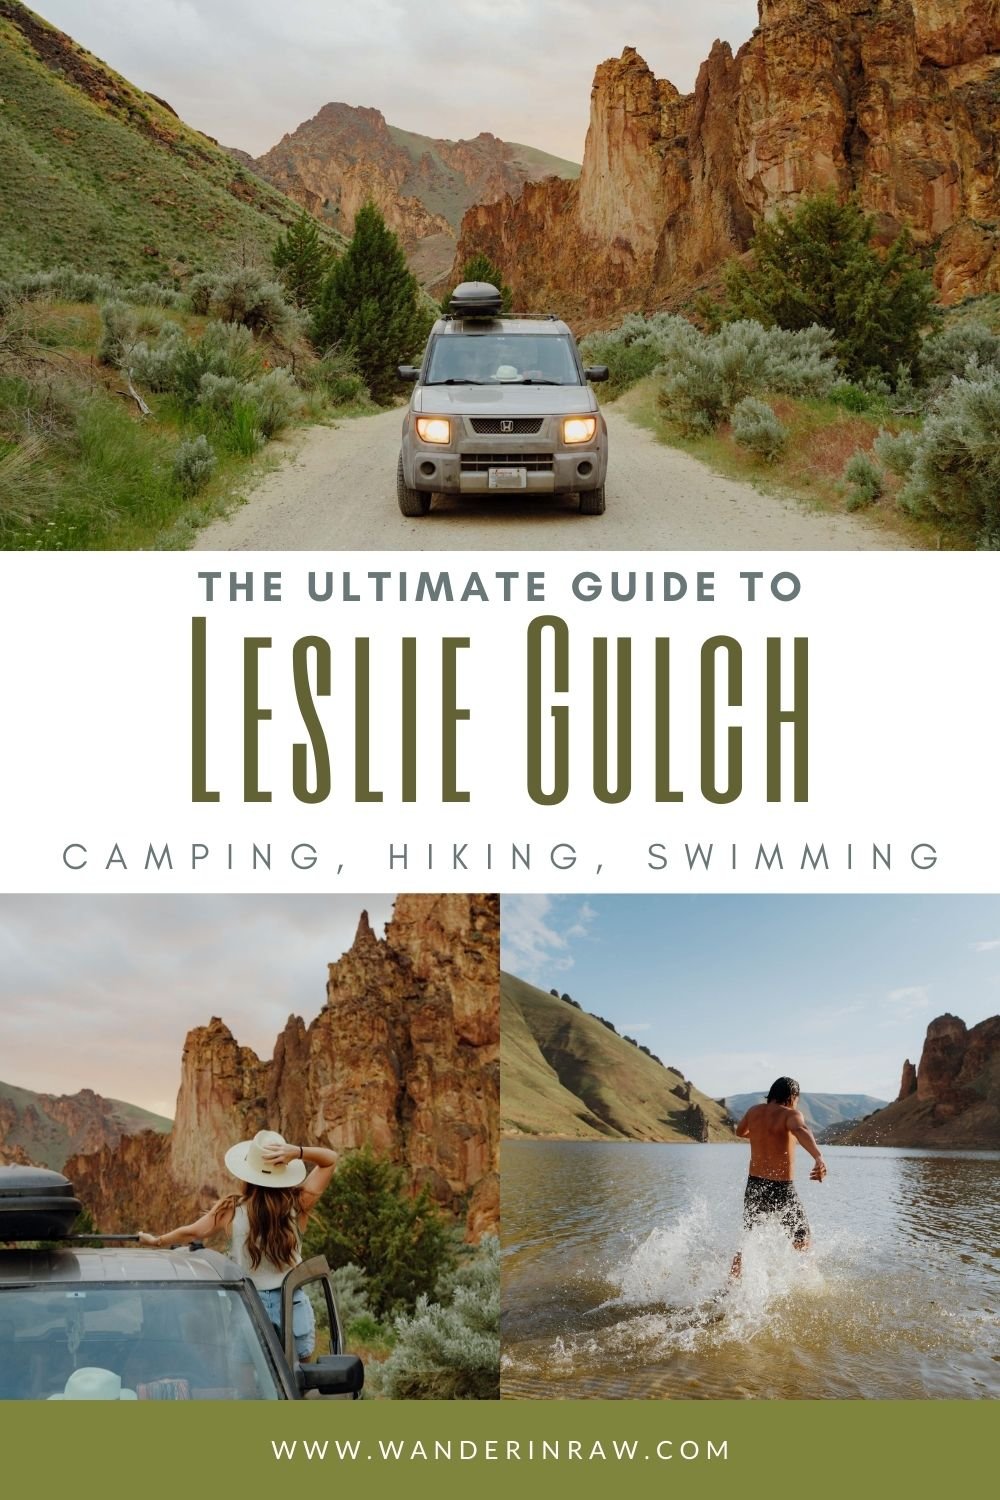 The Ultimate Guide to Leslie Gulch